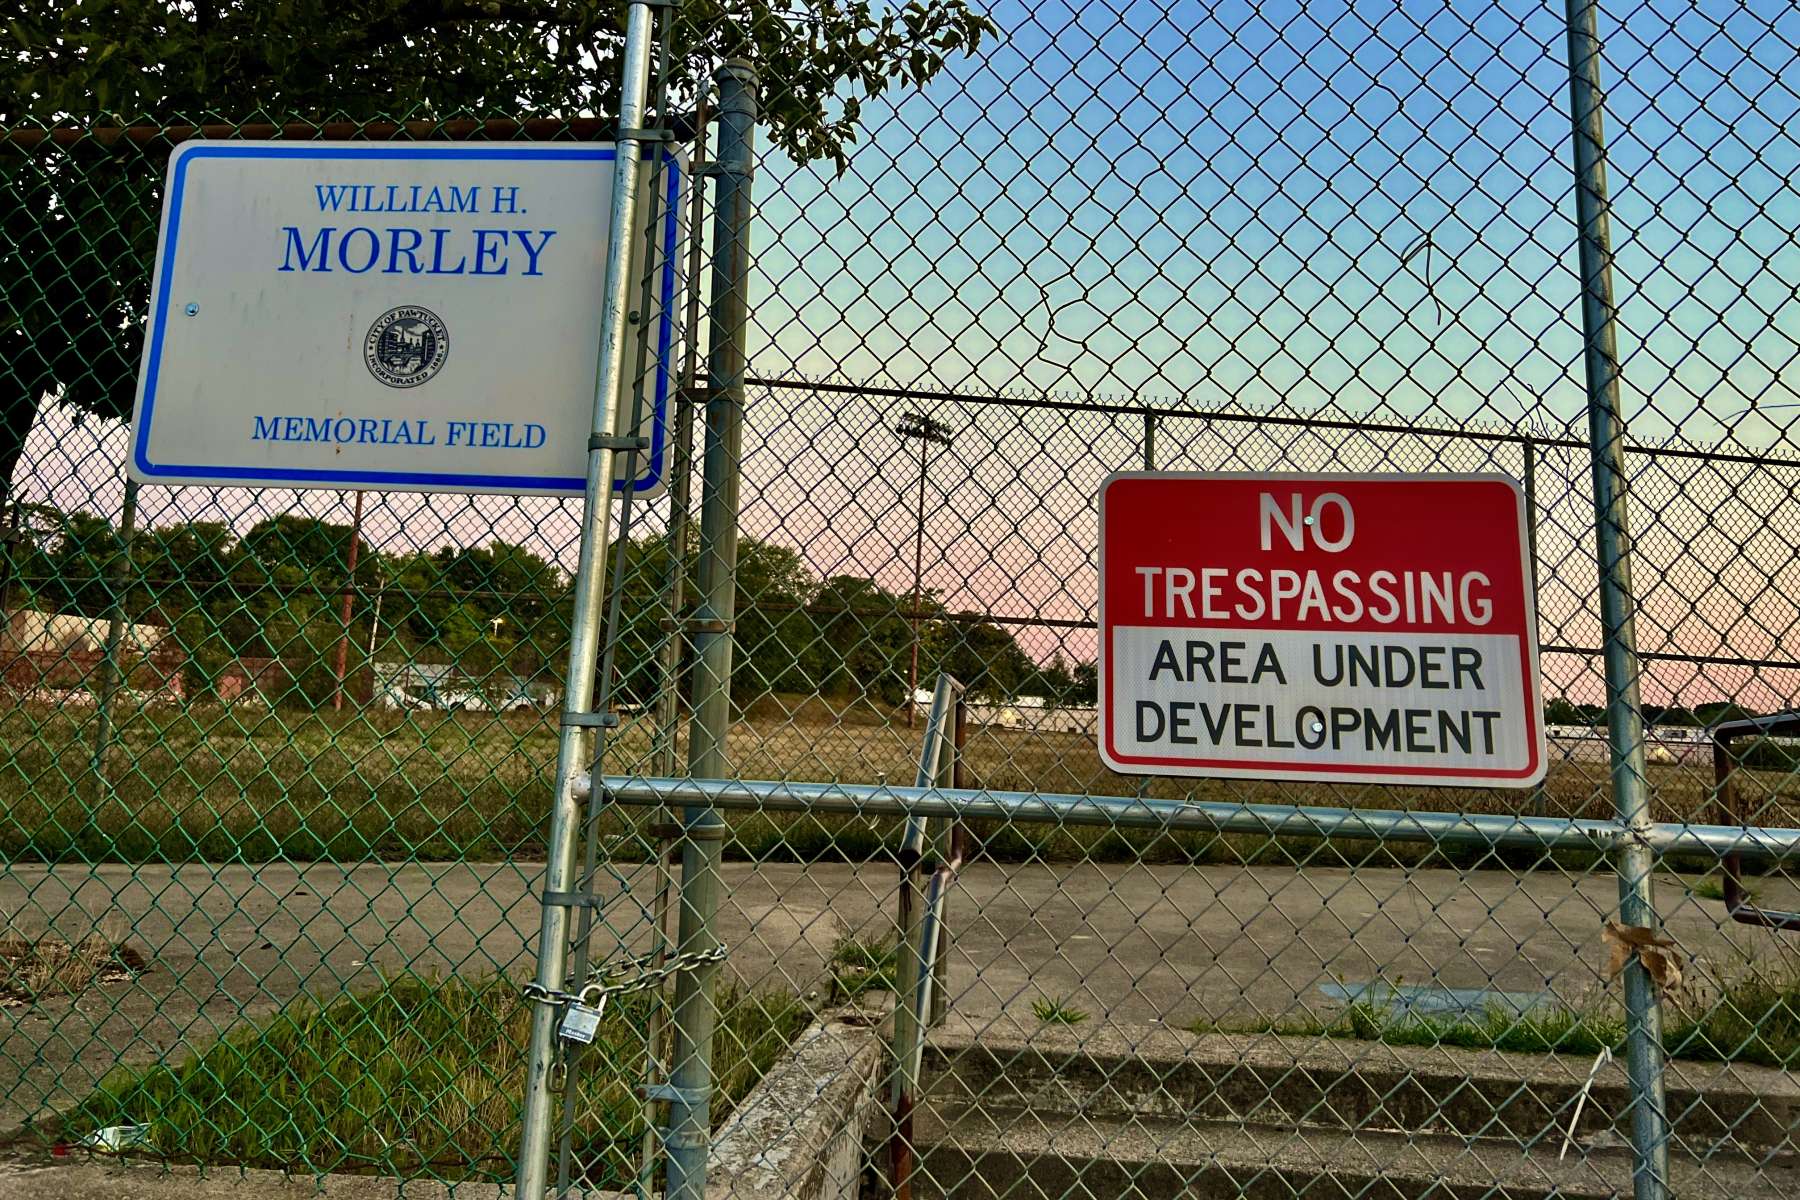 Pawtucket continues plan to permanently shut down Morley Field